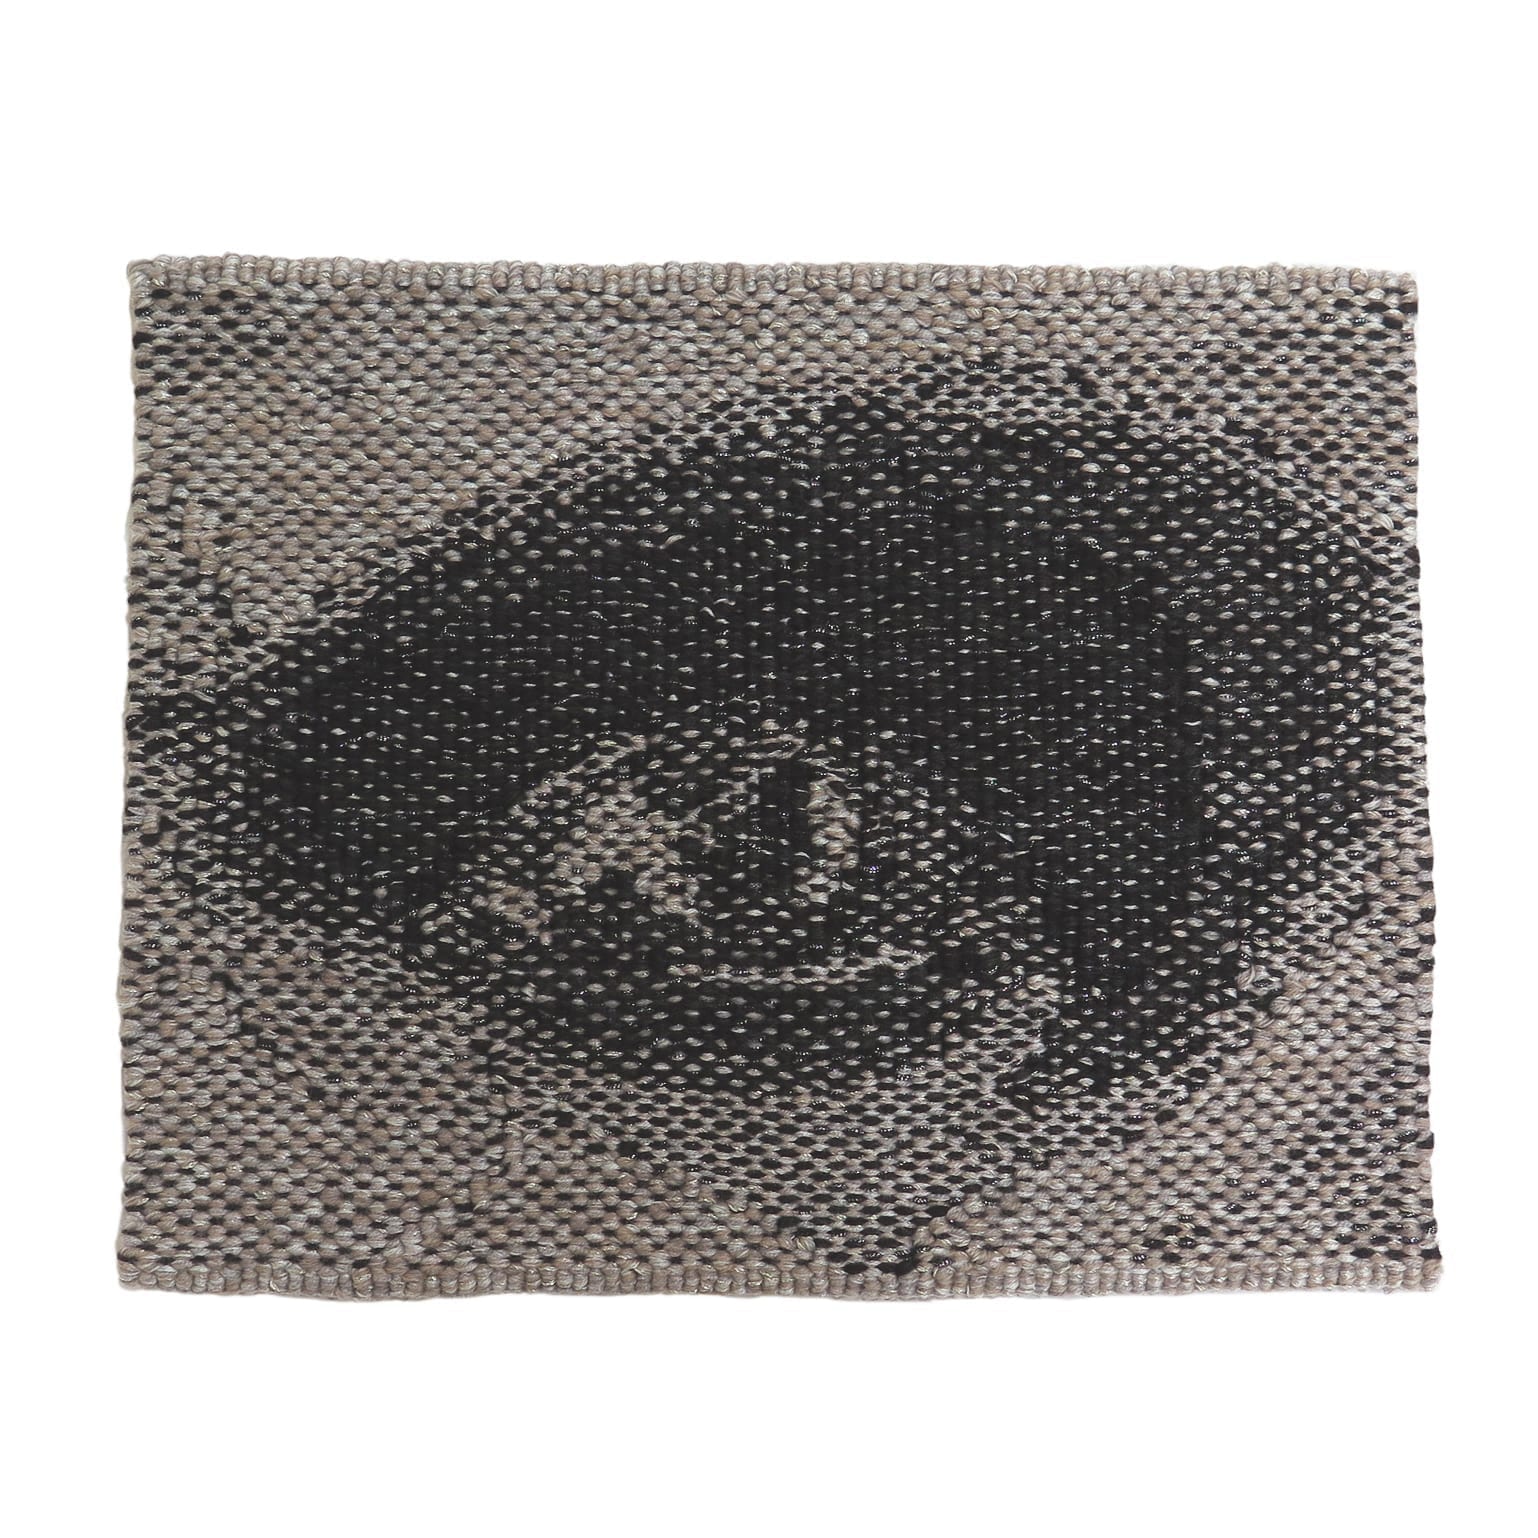 ‘Miili' Edition #6 designed by Brook Andrew in 2019, woven by Chris Cochius, wool, cotton, Lurex, 23.3 x 28.7 cm. 